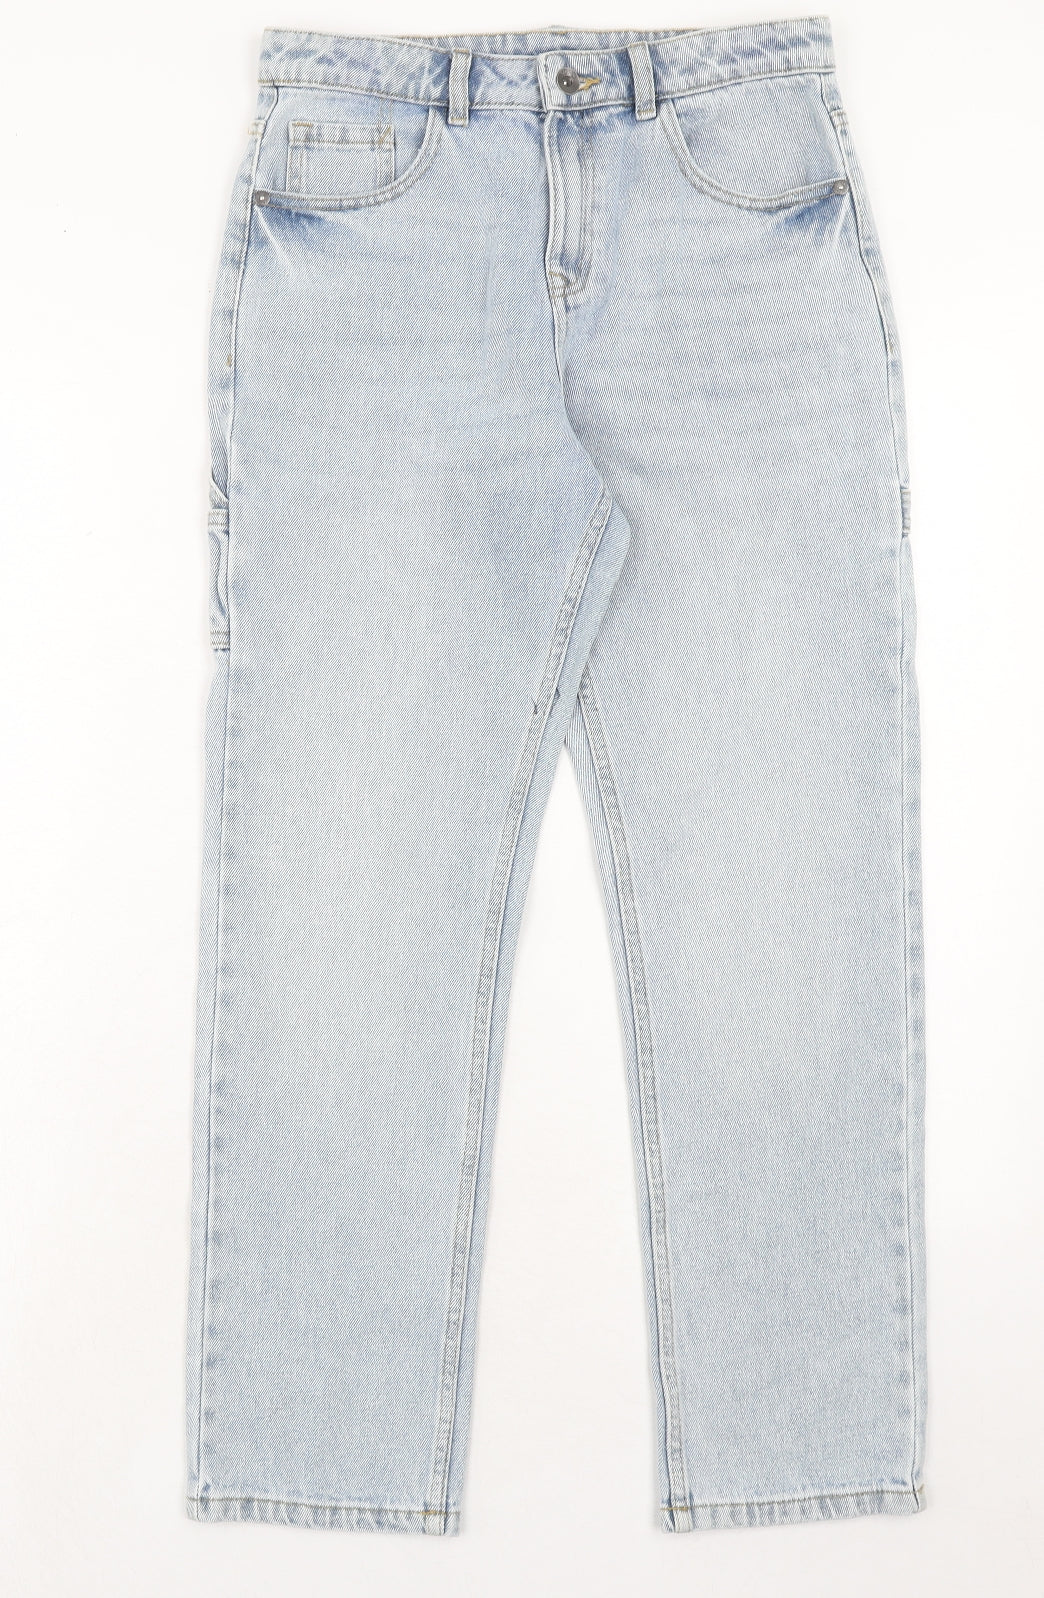 Marks and Spencer Girls Blue Cotton Straight Jeans Size 12-13 Years Regular Zip